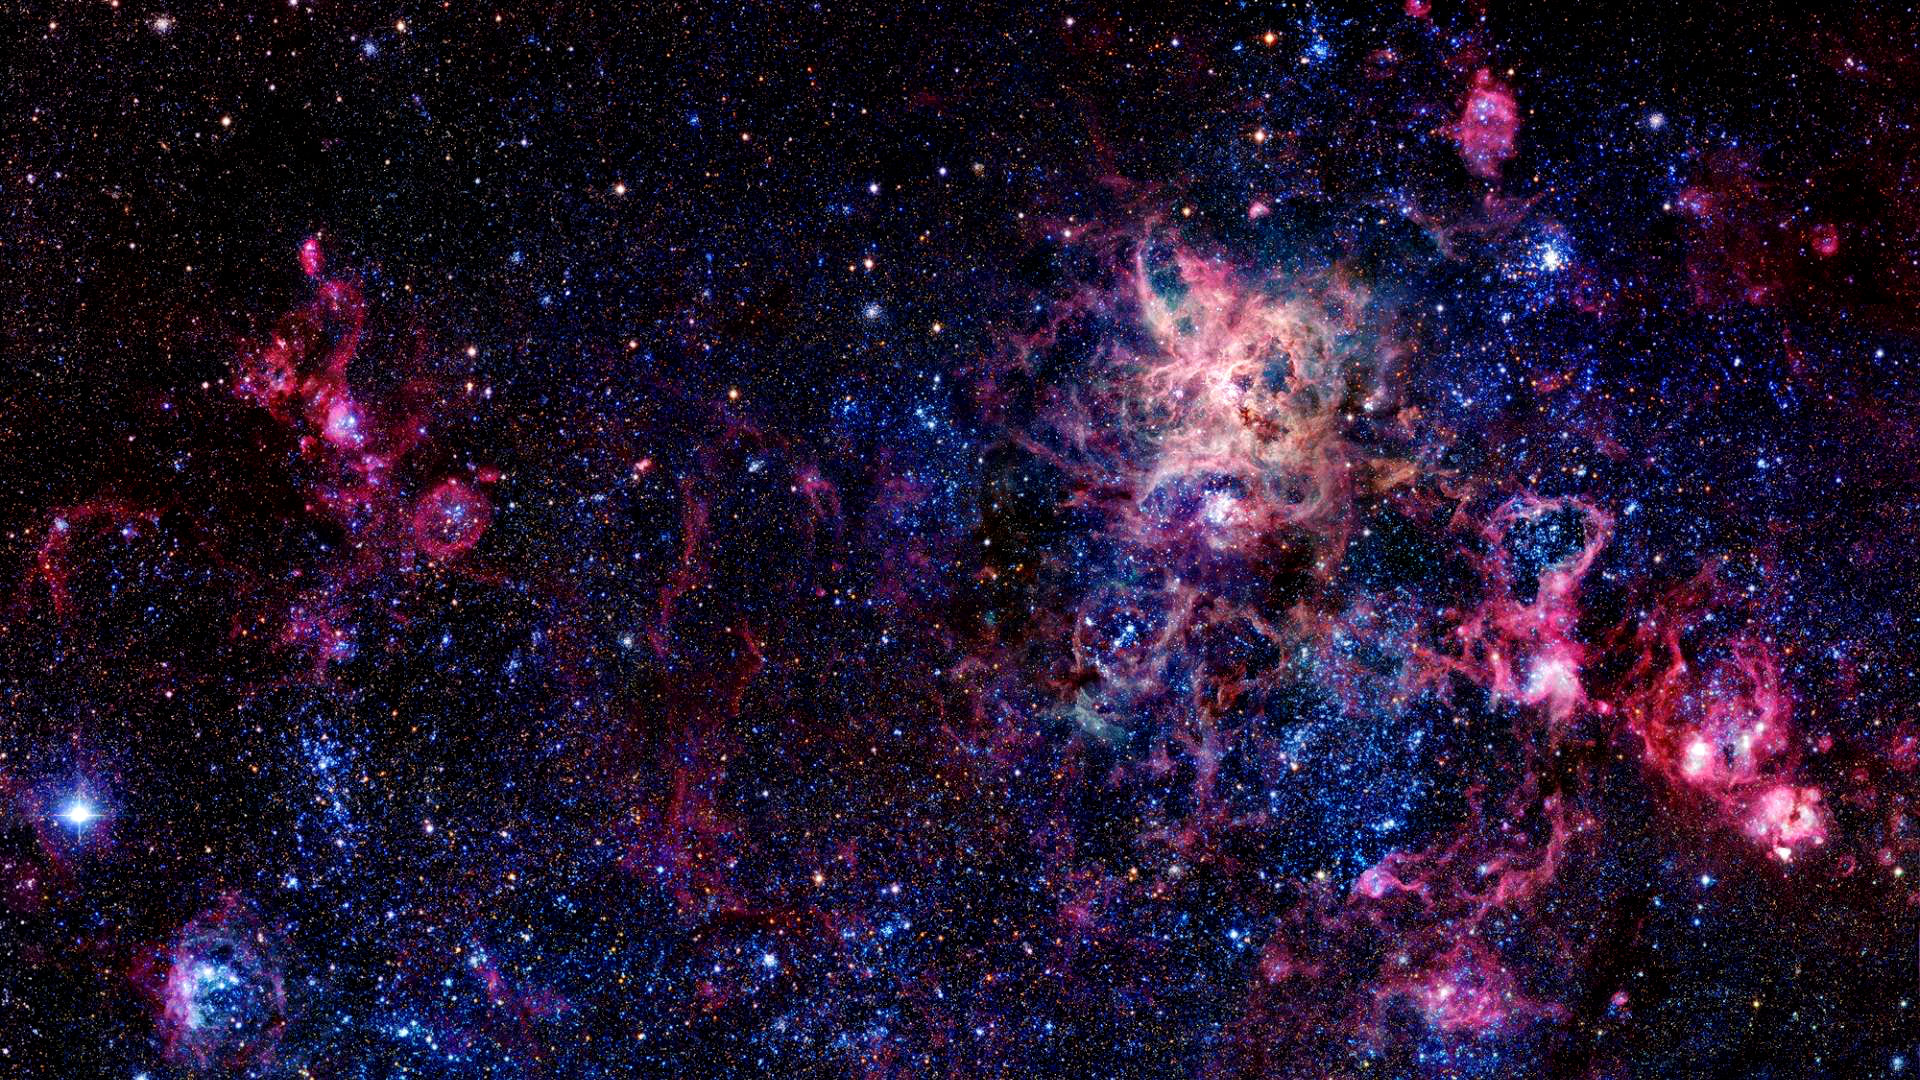 Nebula Backgrounds Page 2 Pics About Space HD Wallpapers Download Free Images Wallpaper [wallpaper981.blogspot.com]